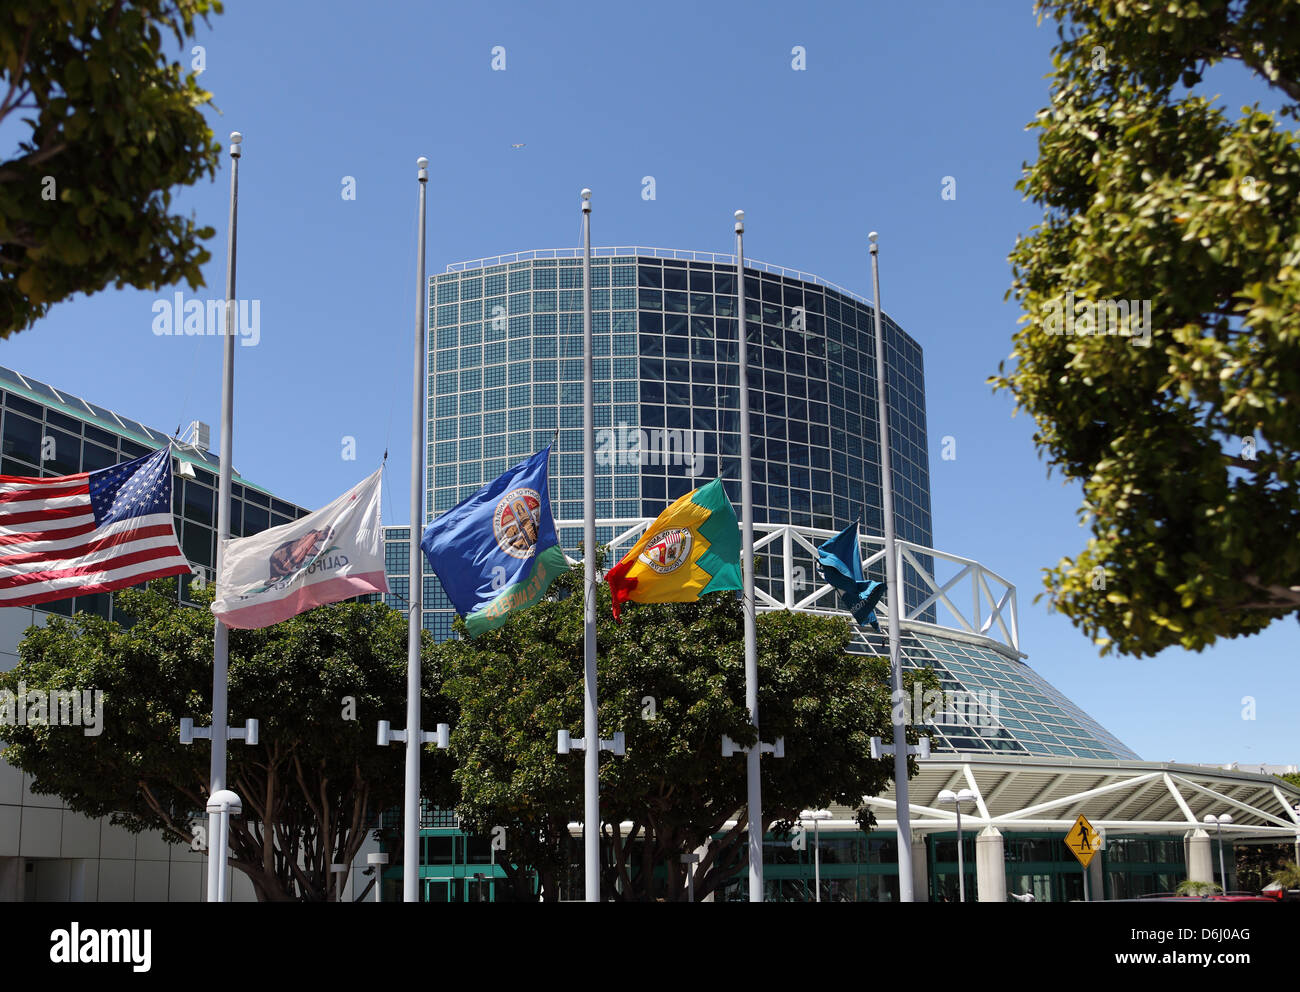 LOS ANGELES, CALIFORNIA, USA - April 16, 2013 - The Convention Center in Downtown Los Angeles on April 16, 2013. Stock Photo